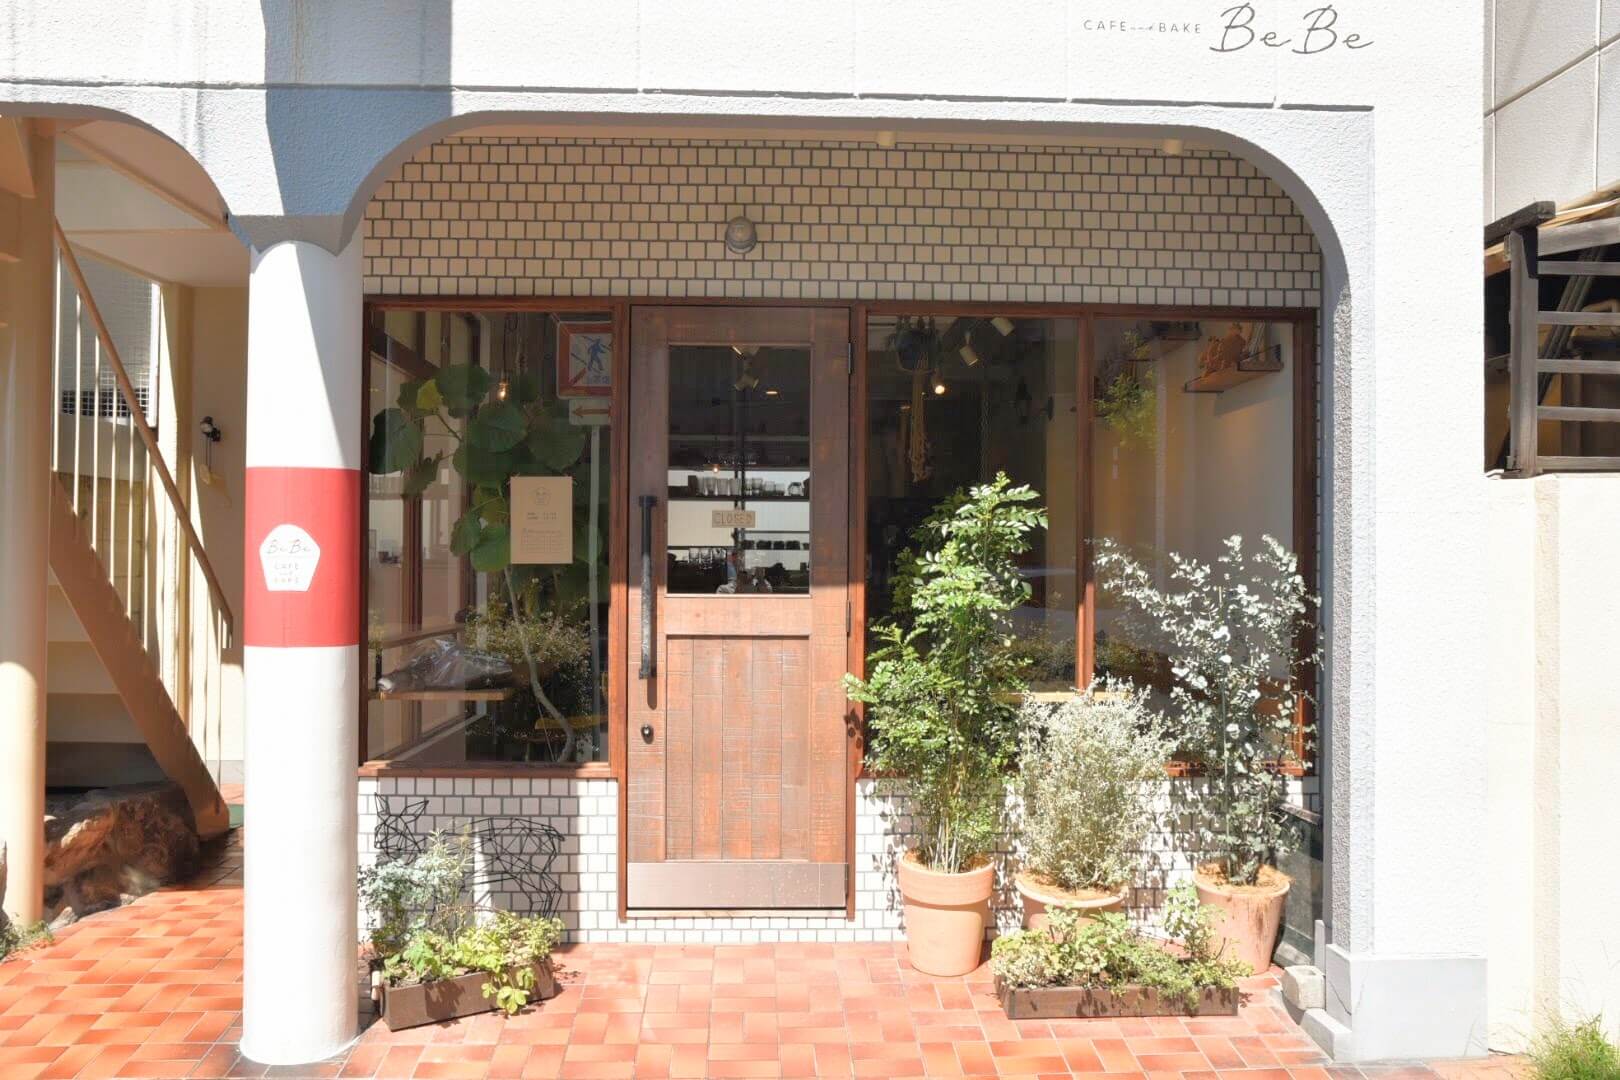 『CAFE and BAKE BeBe（カフェ&ベイク べべ）』へ